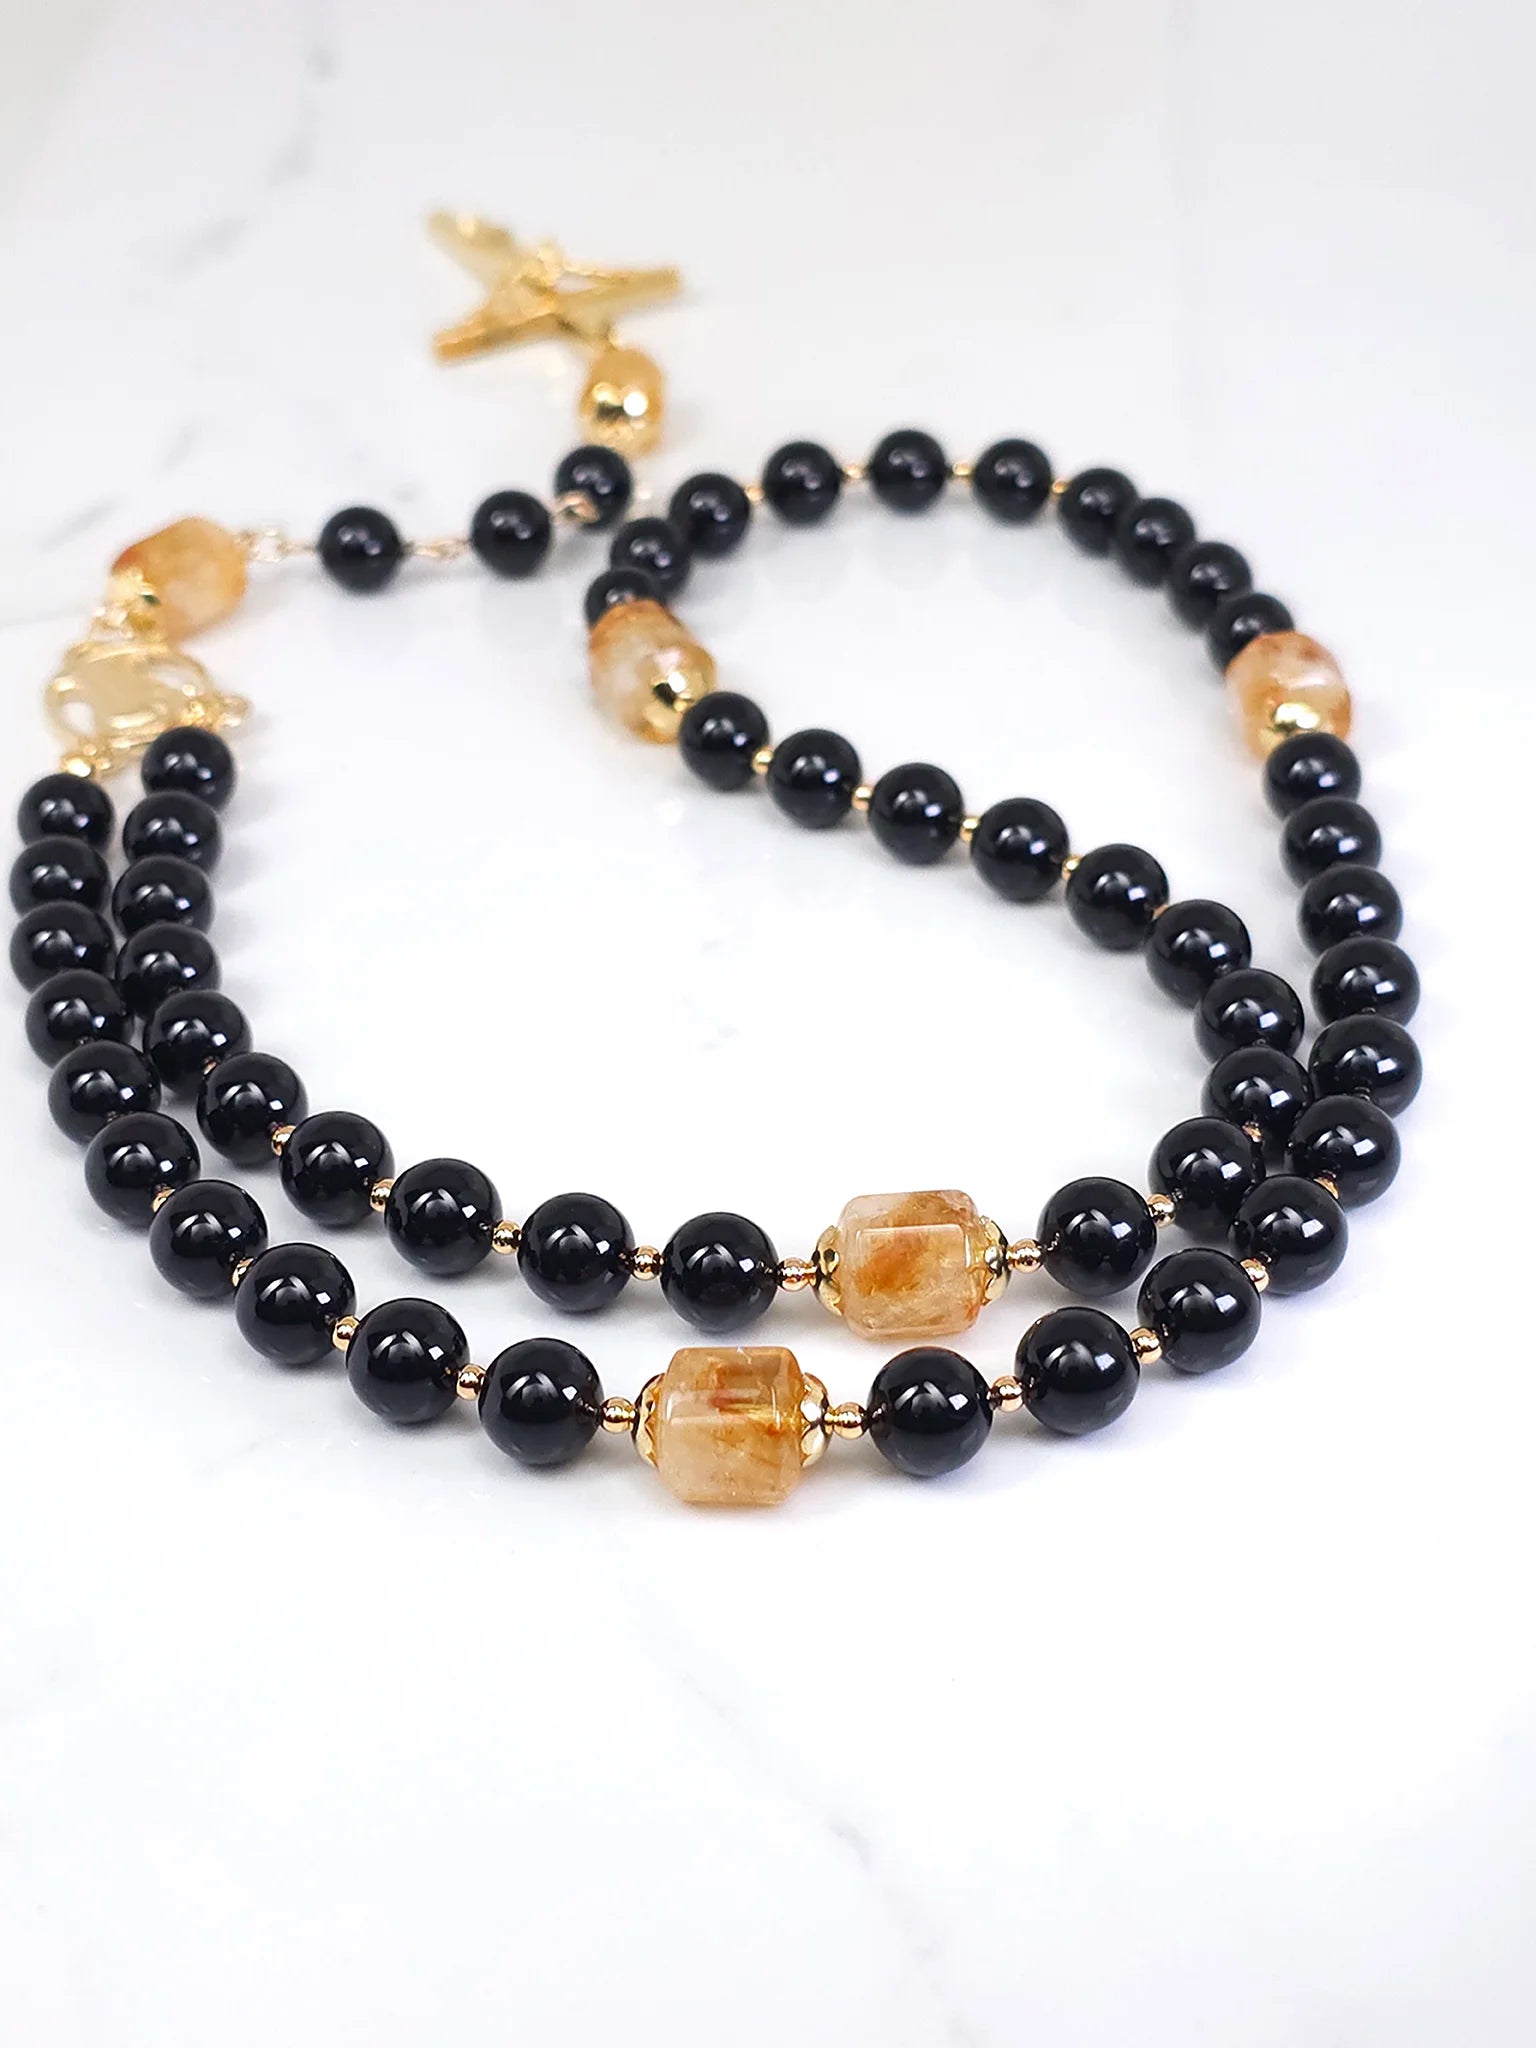 Elegant rosary combining Black Onyx beads with Golden Citrine, complemented by a Gold Madonna medal, laid on a white table.